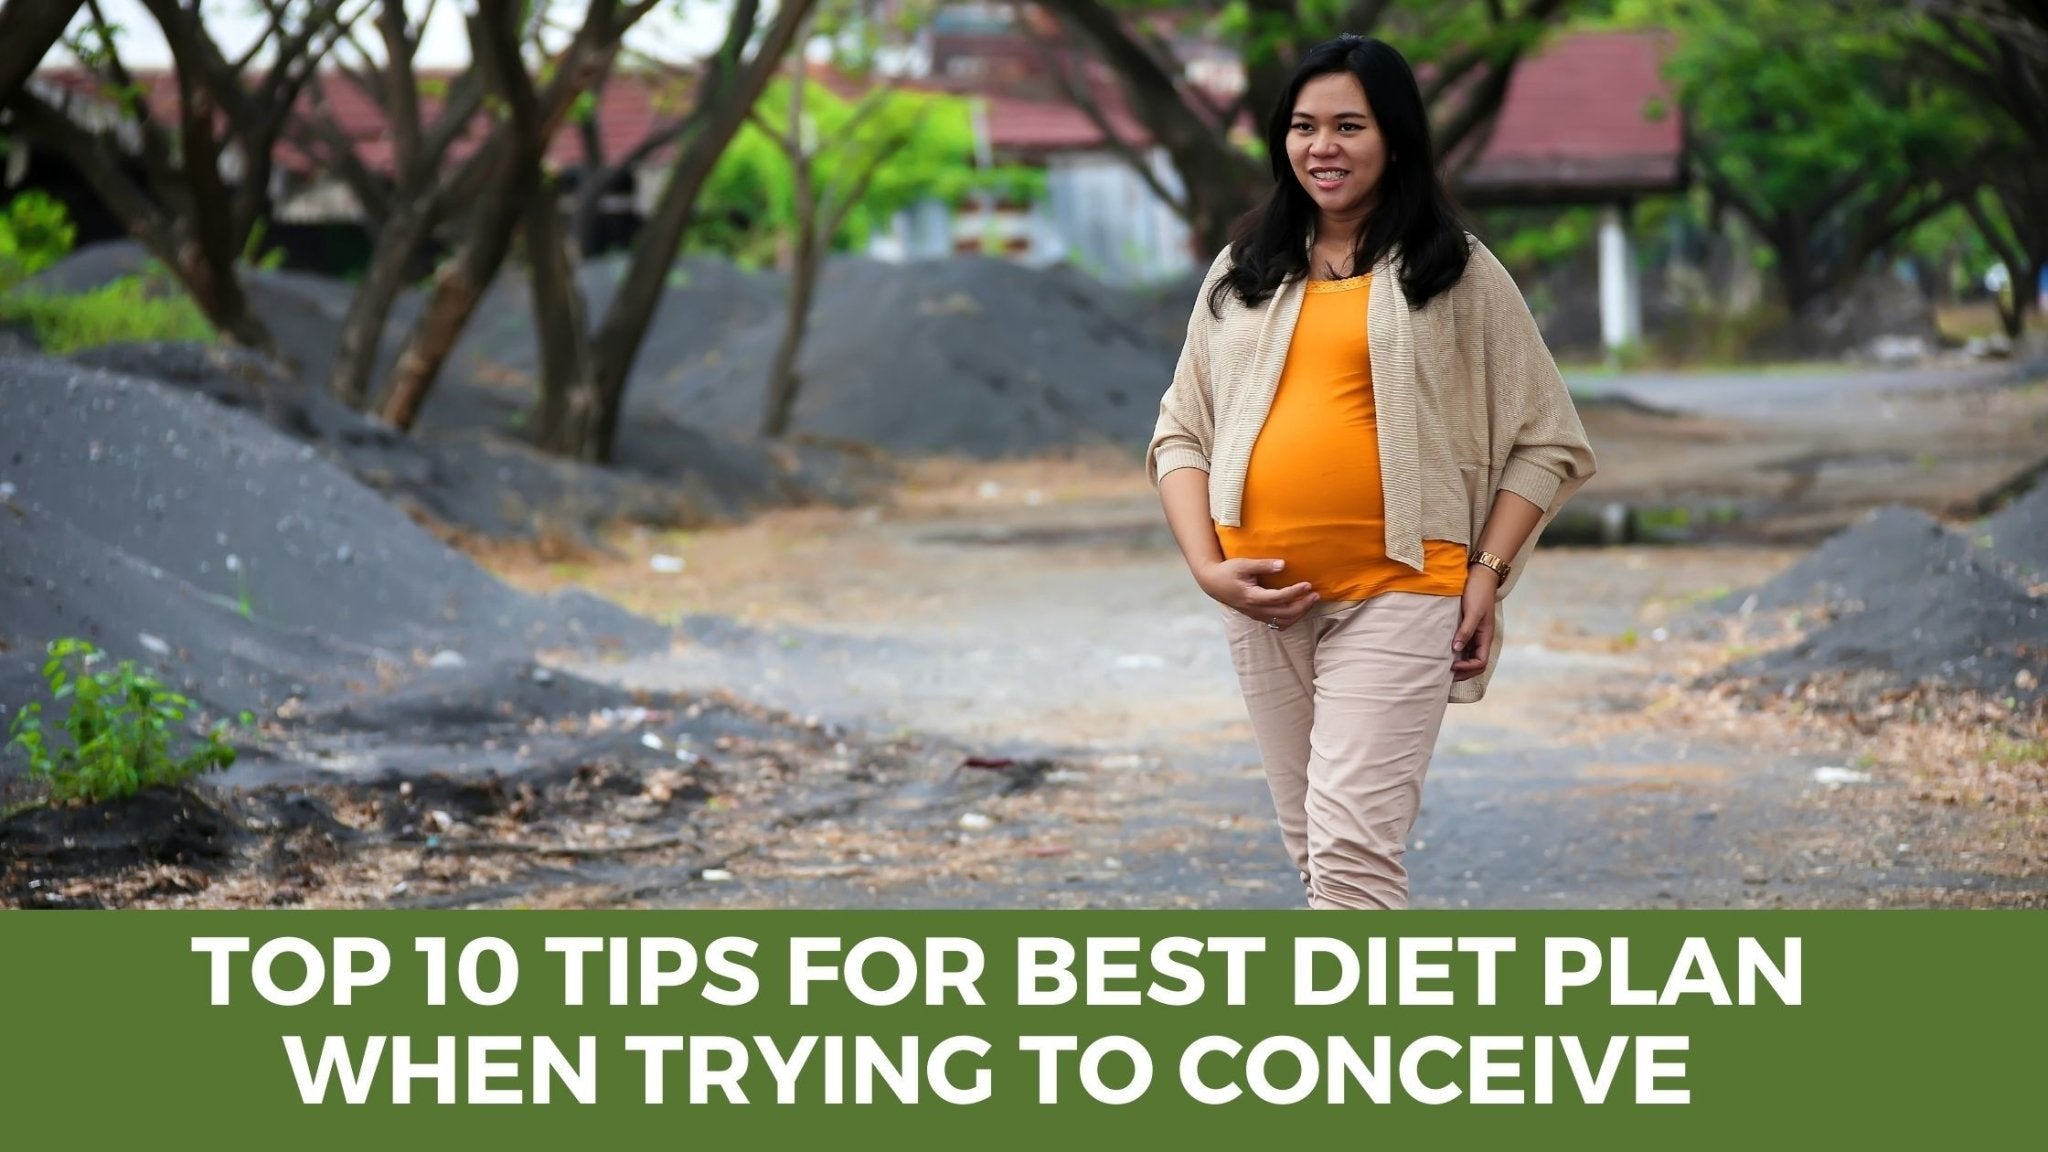 Top 10 Tips for Best Diet Plan When Trying to Conceive - Herbal Hermit